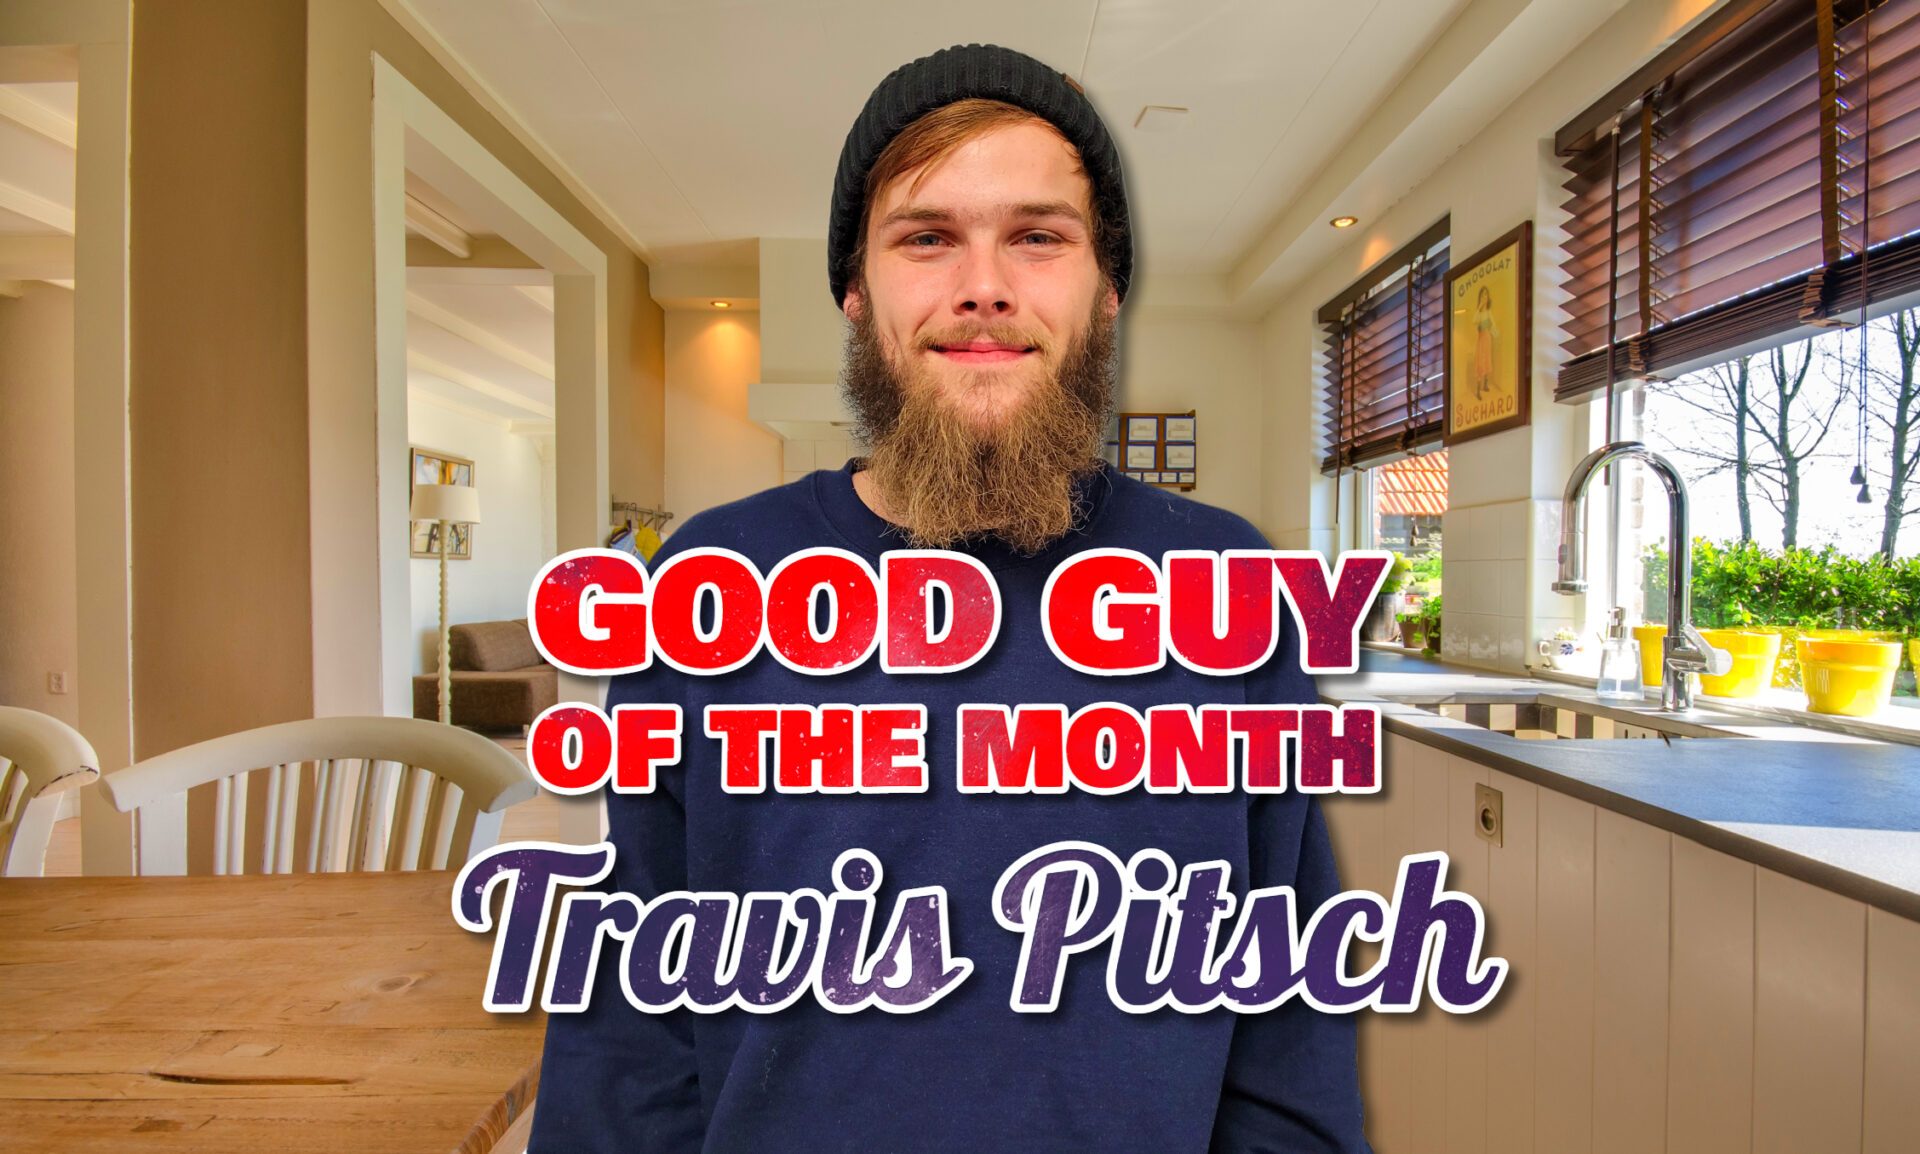 Good Guy of the Month Travis Pitsch Good Guy of the Month: Travis Pitsch